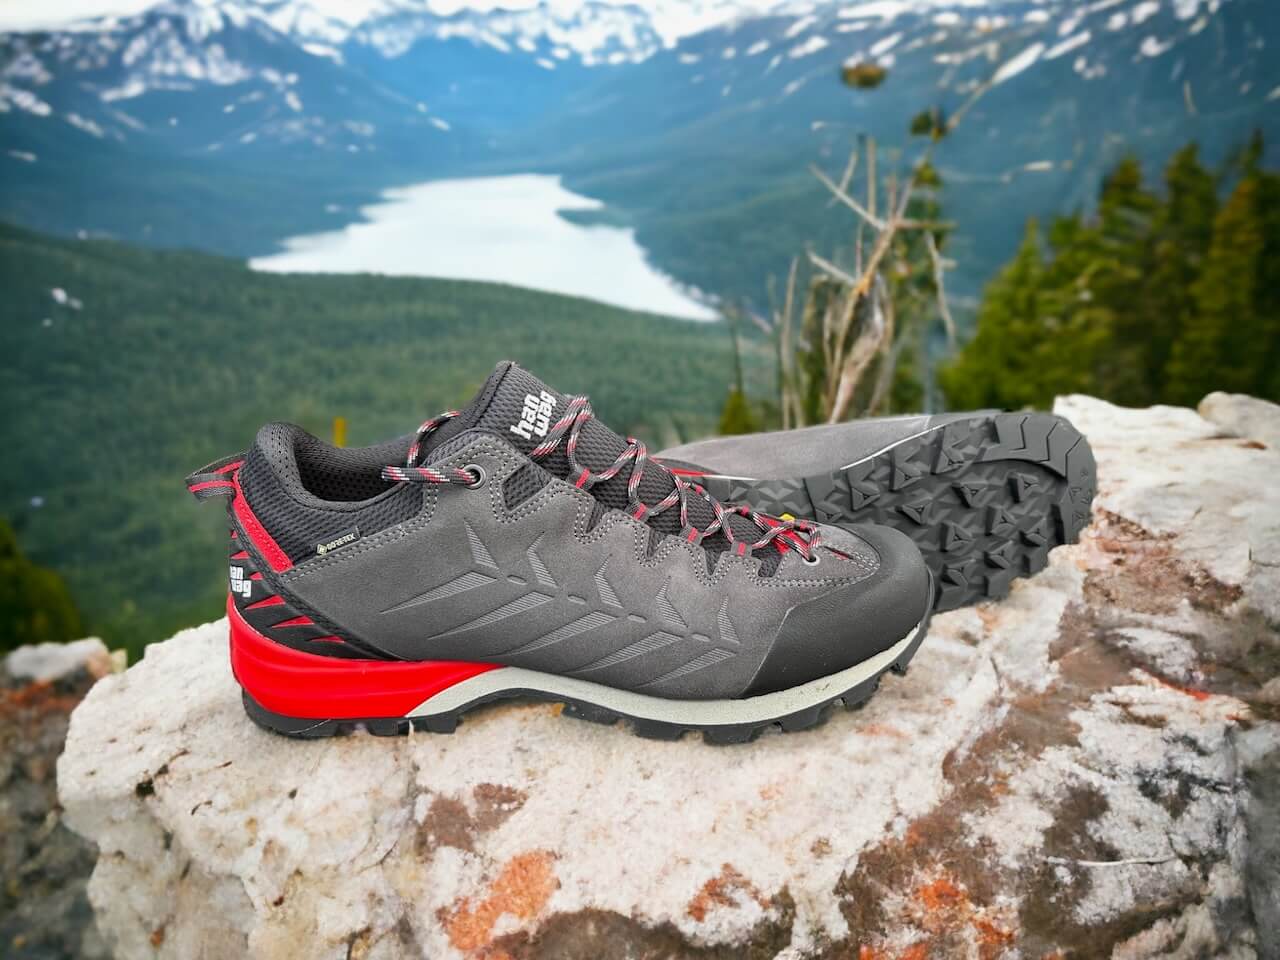 Featured image for “Test: Hanwag Makra Pro Low GTX”